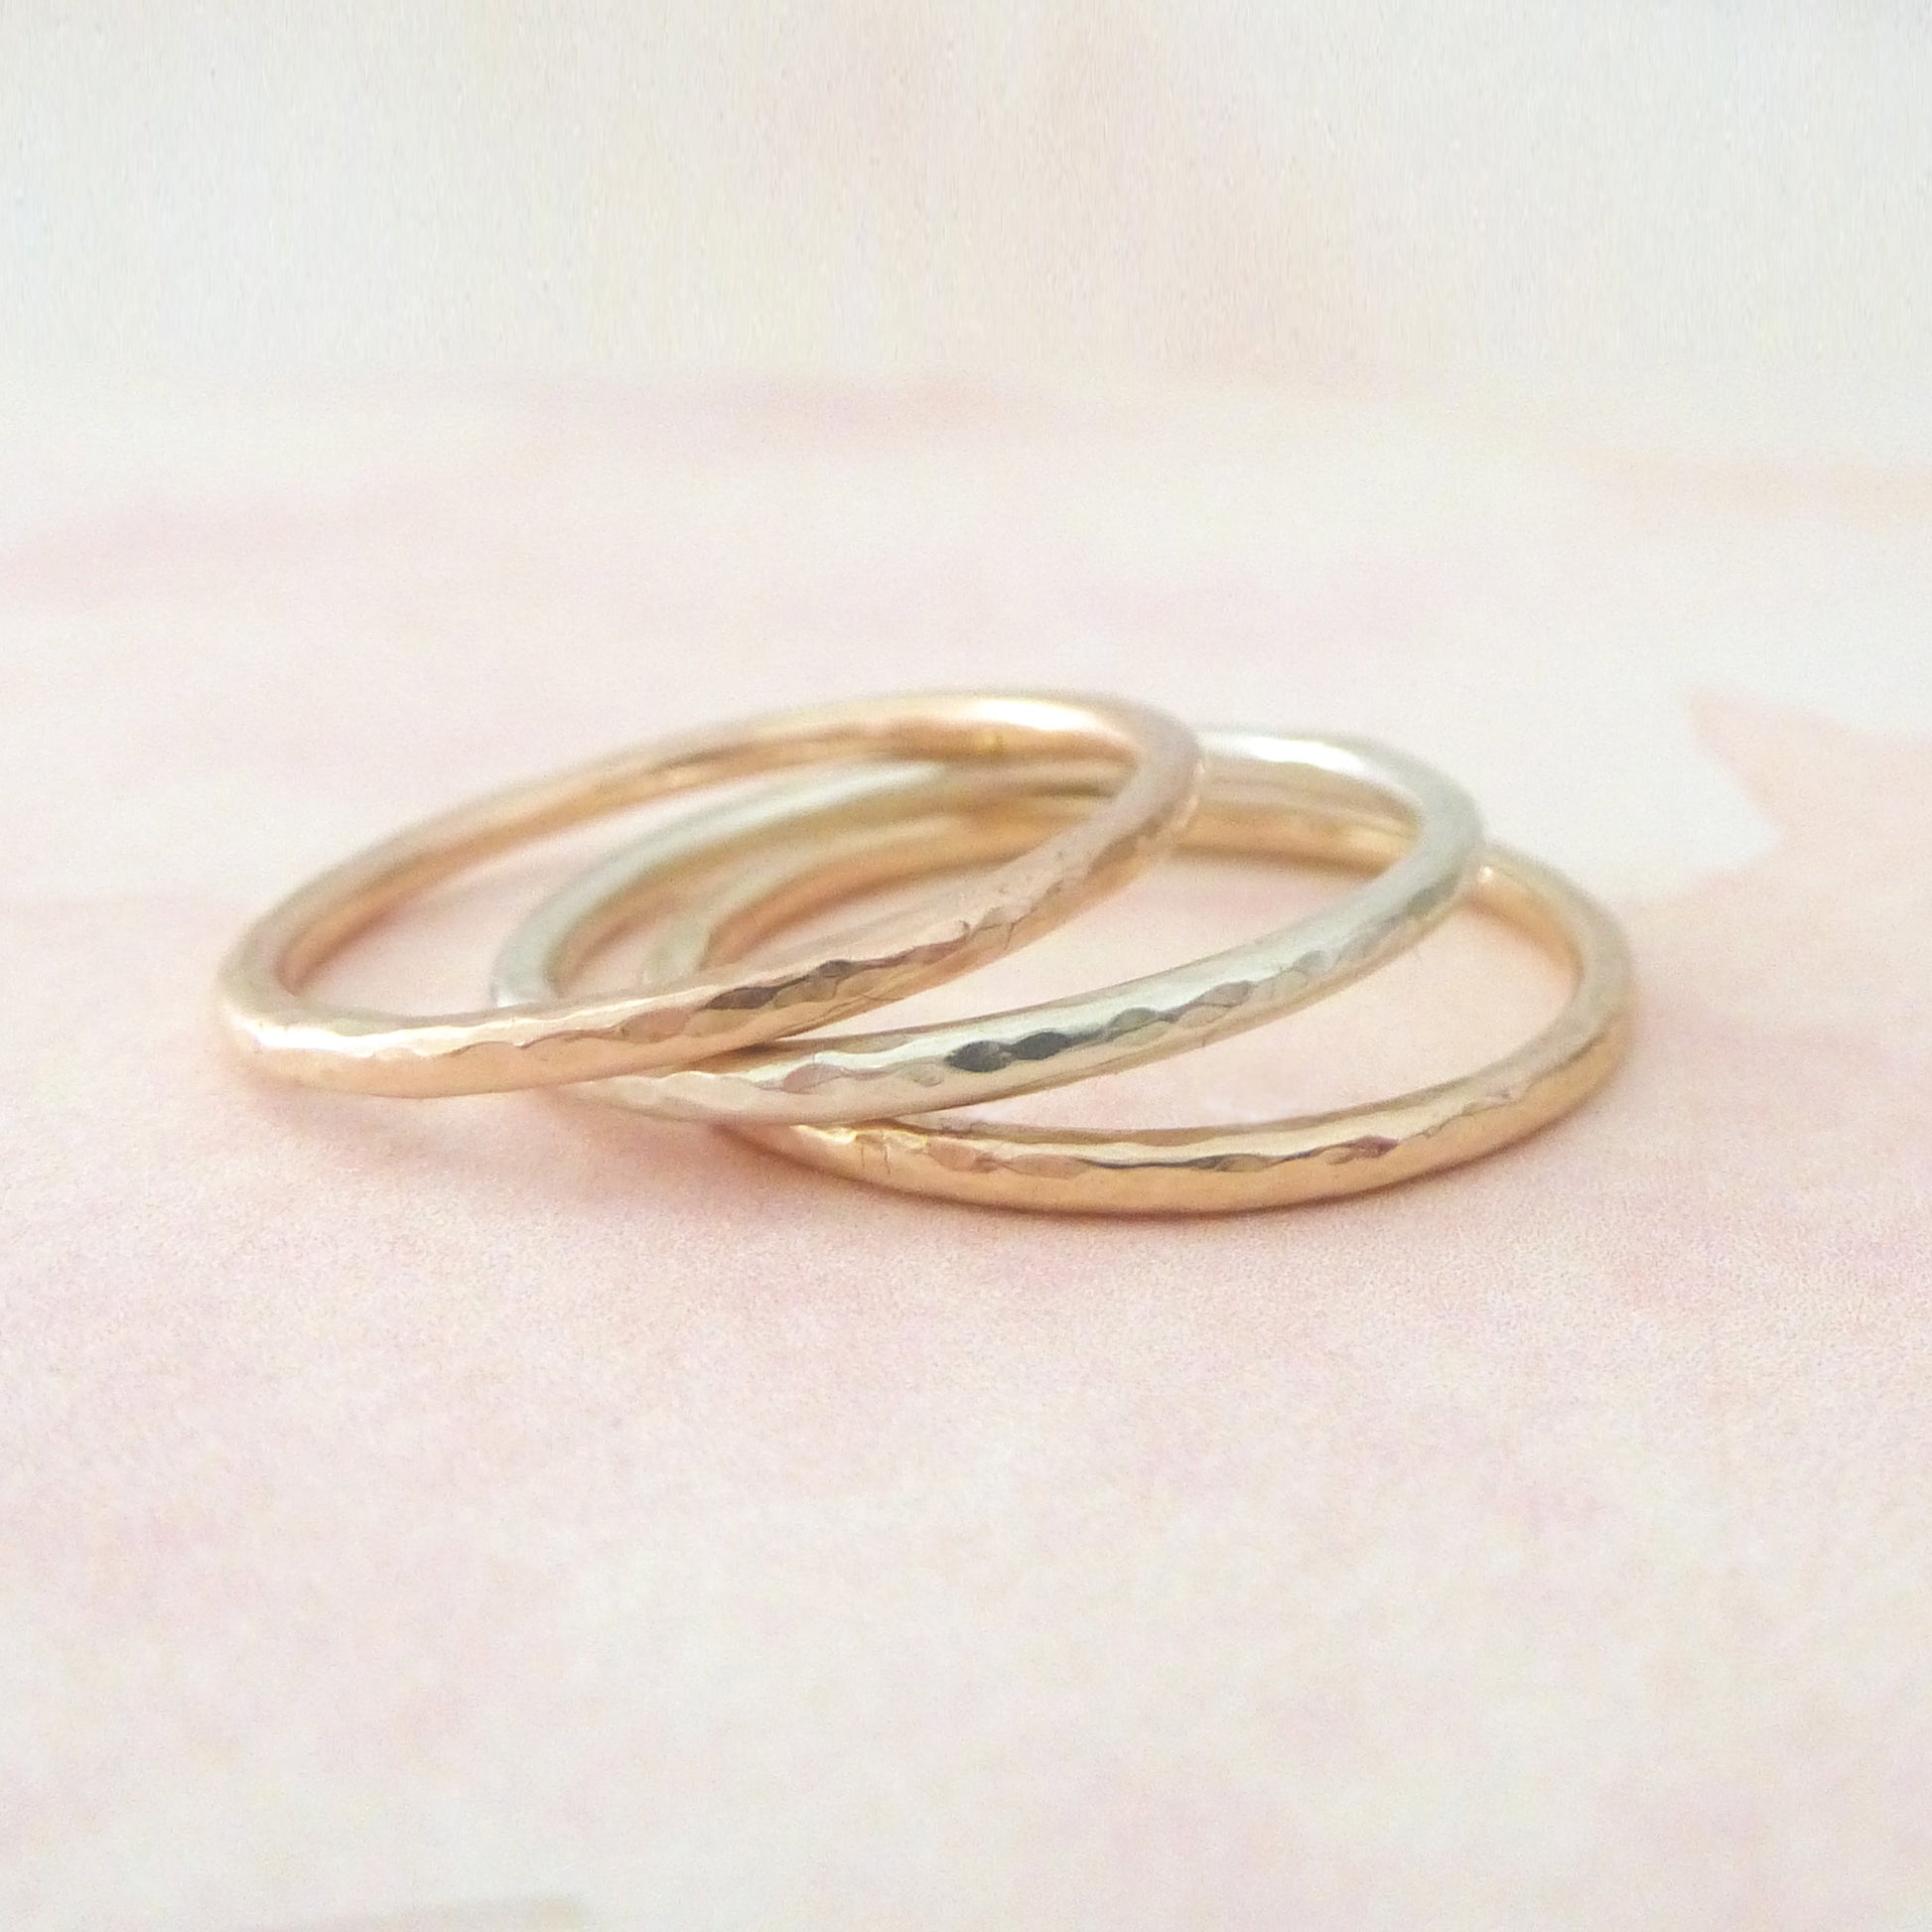 A stack of 3 hammered bands, 1.2mm in diameter in 9ct gold